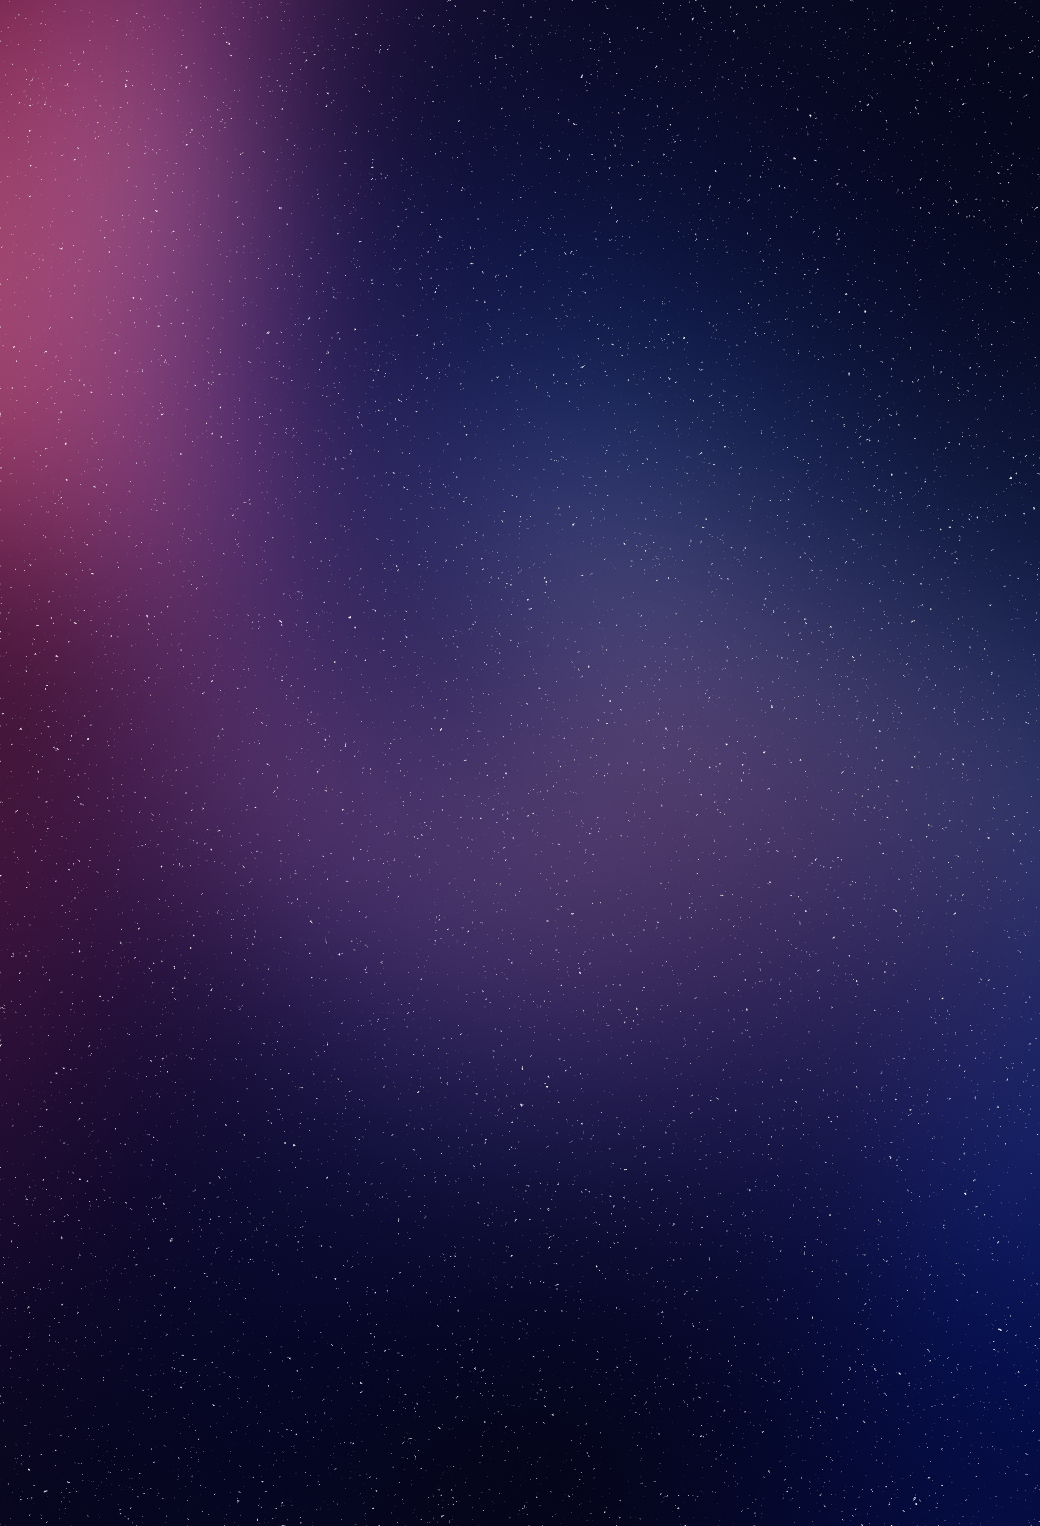 Download All the iOS 7 iPad Wallpaper Backgrounds Here - iClarified